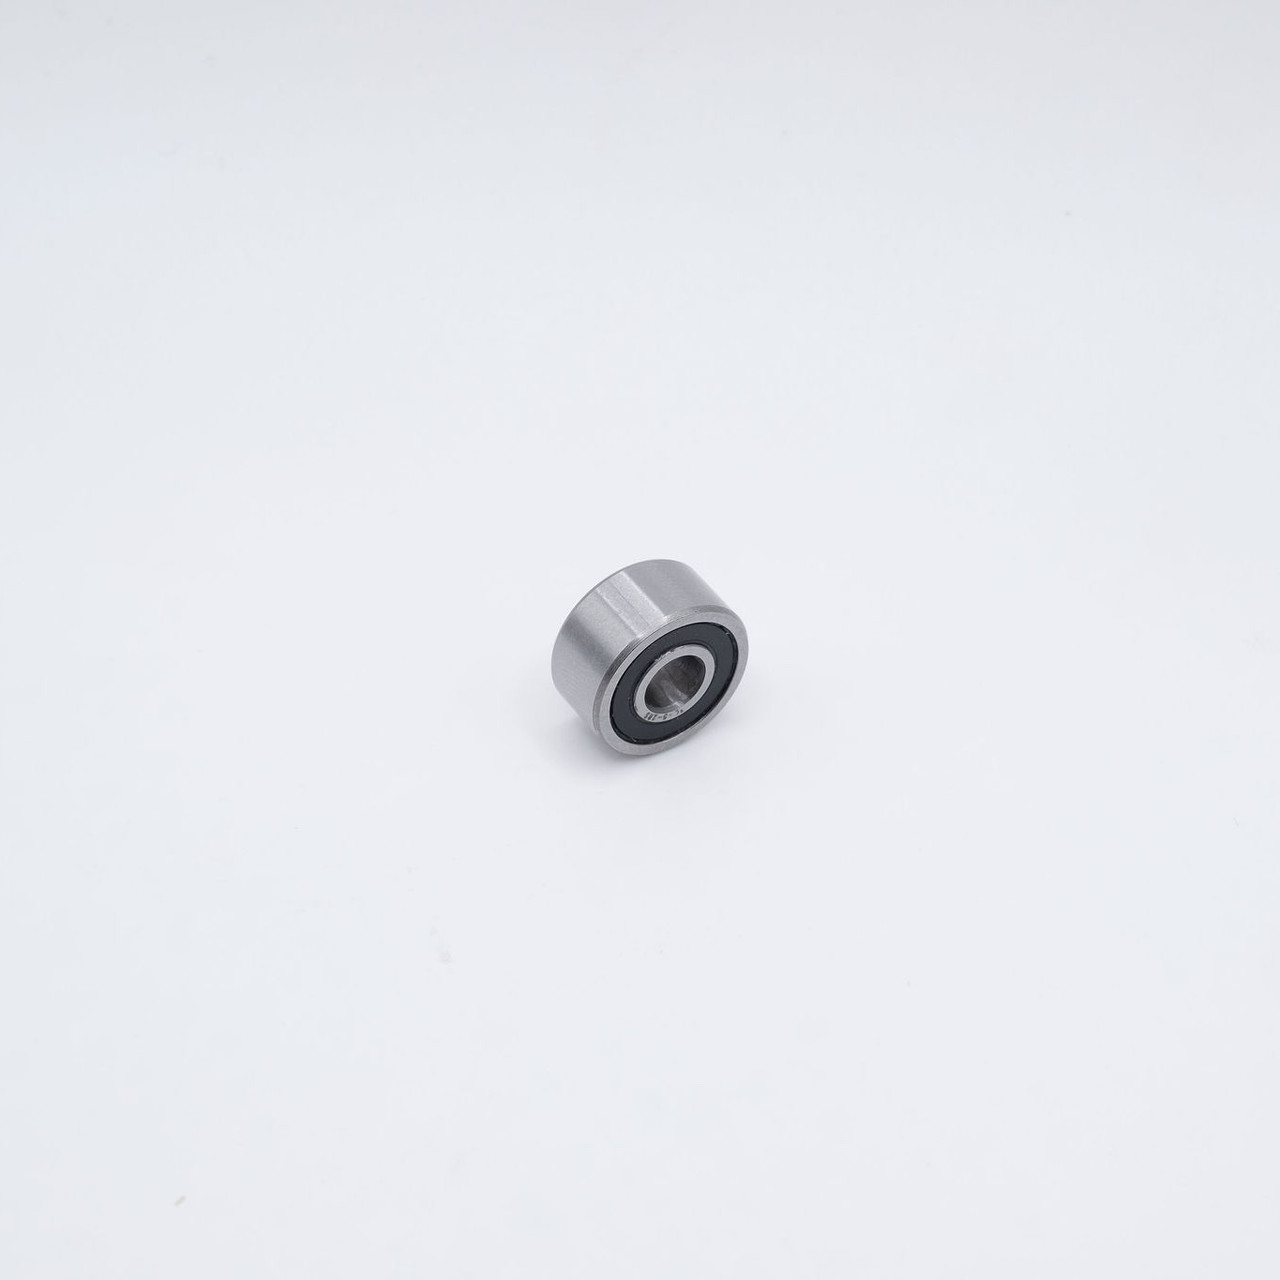 30/5B-2RS Double Row Ball Bearing 5x14x7mm Left Angled View